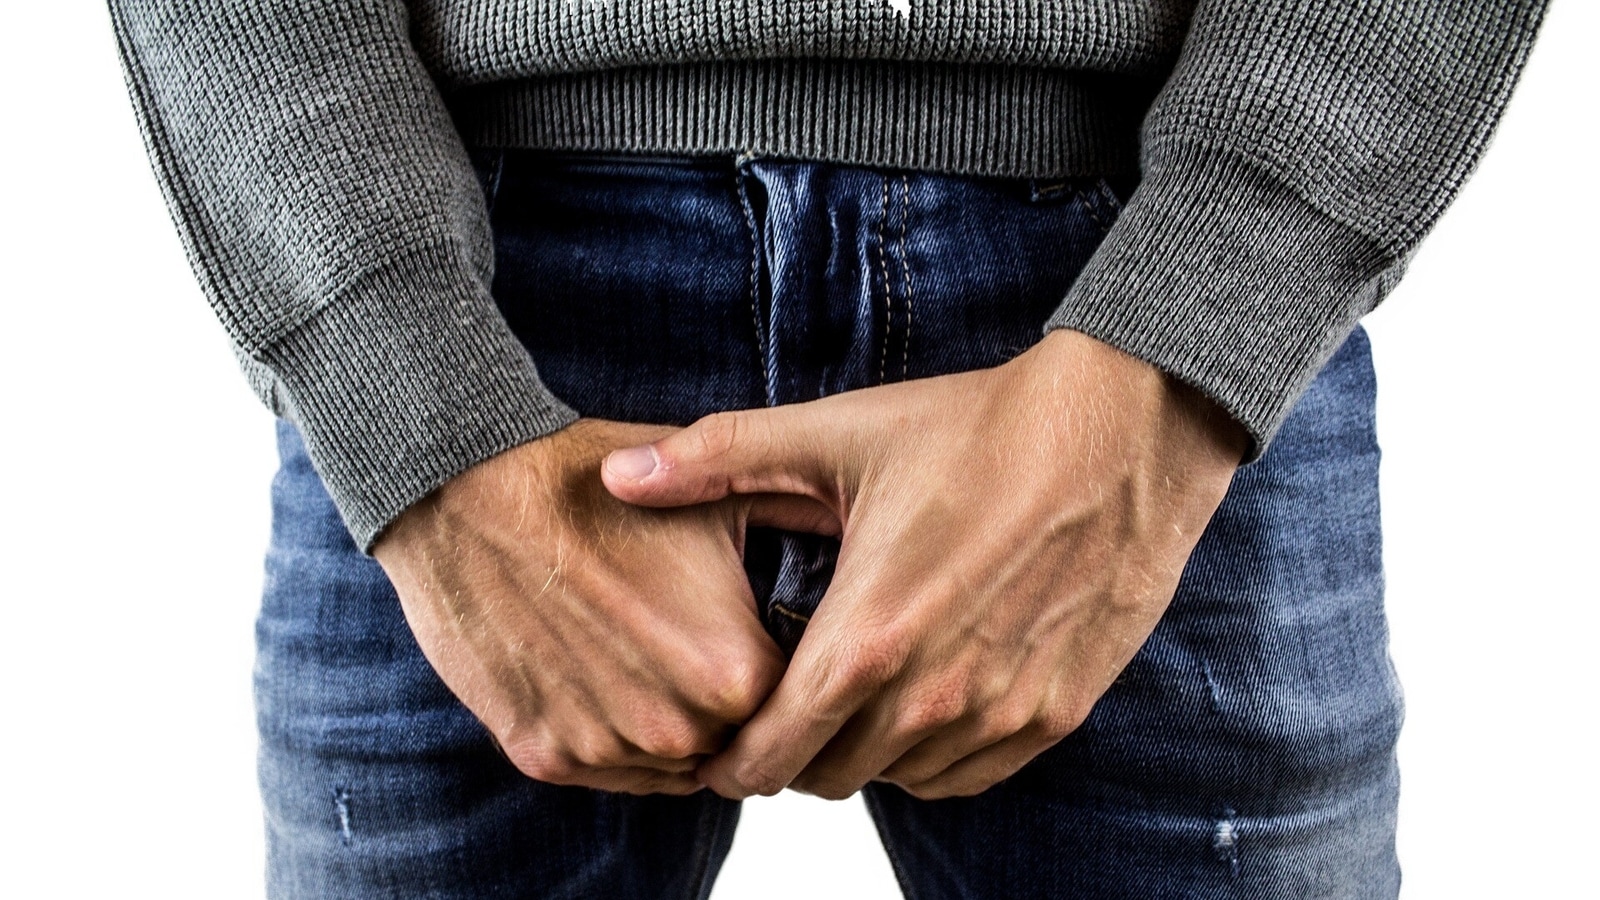 Men's health tips: Can tight jeans cause testicular cancer